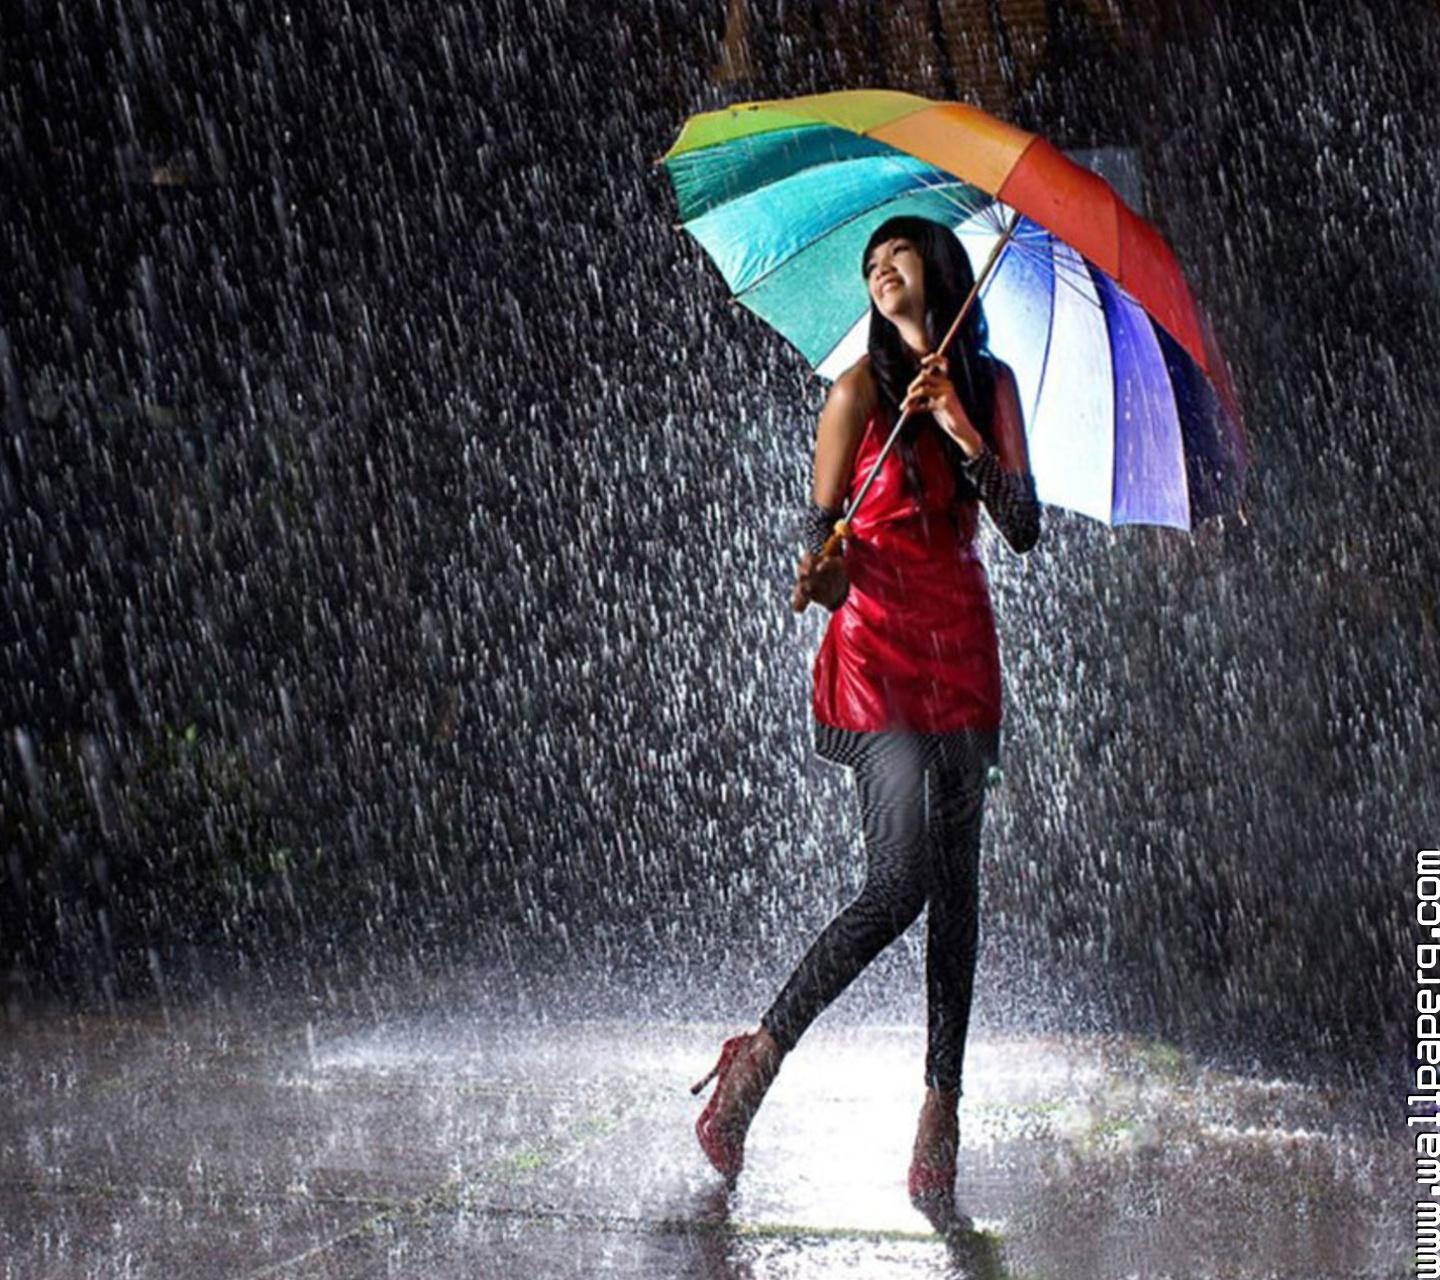 Download Girl in rain - Profile pics for girls for your mobile cell phone